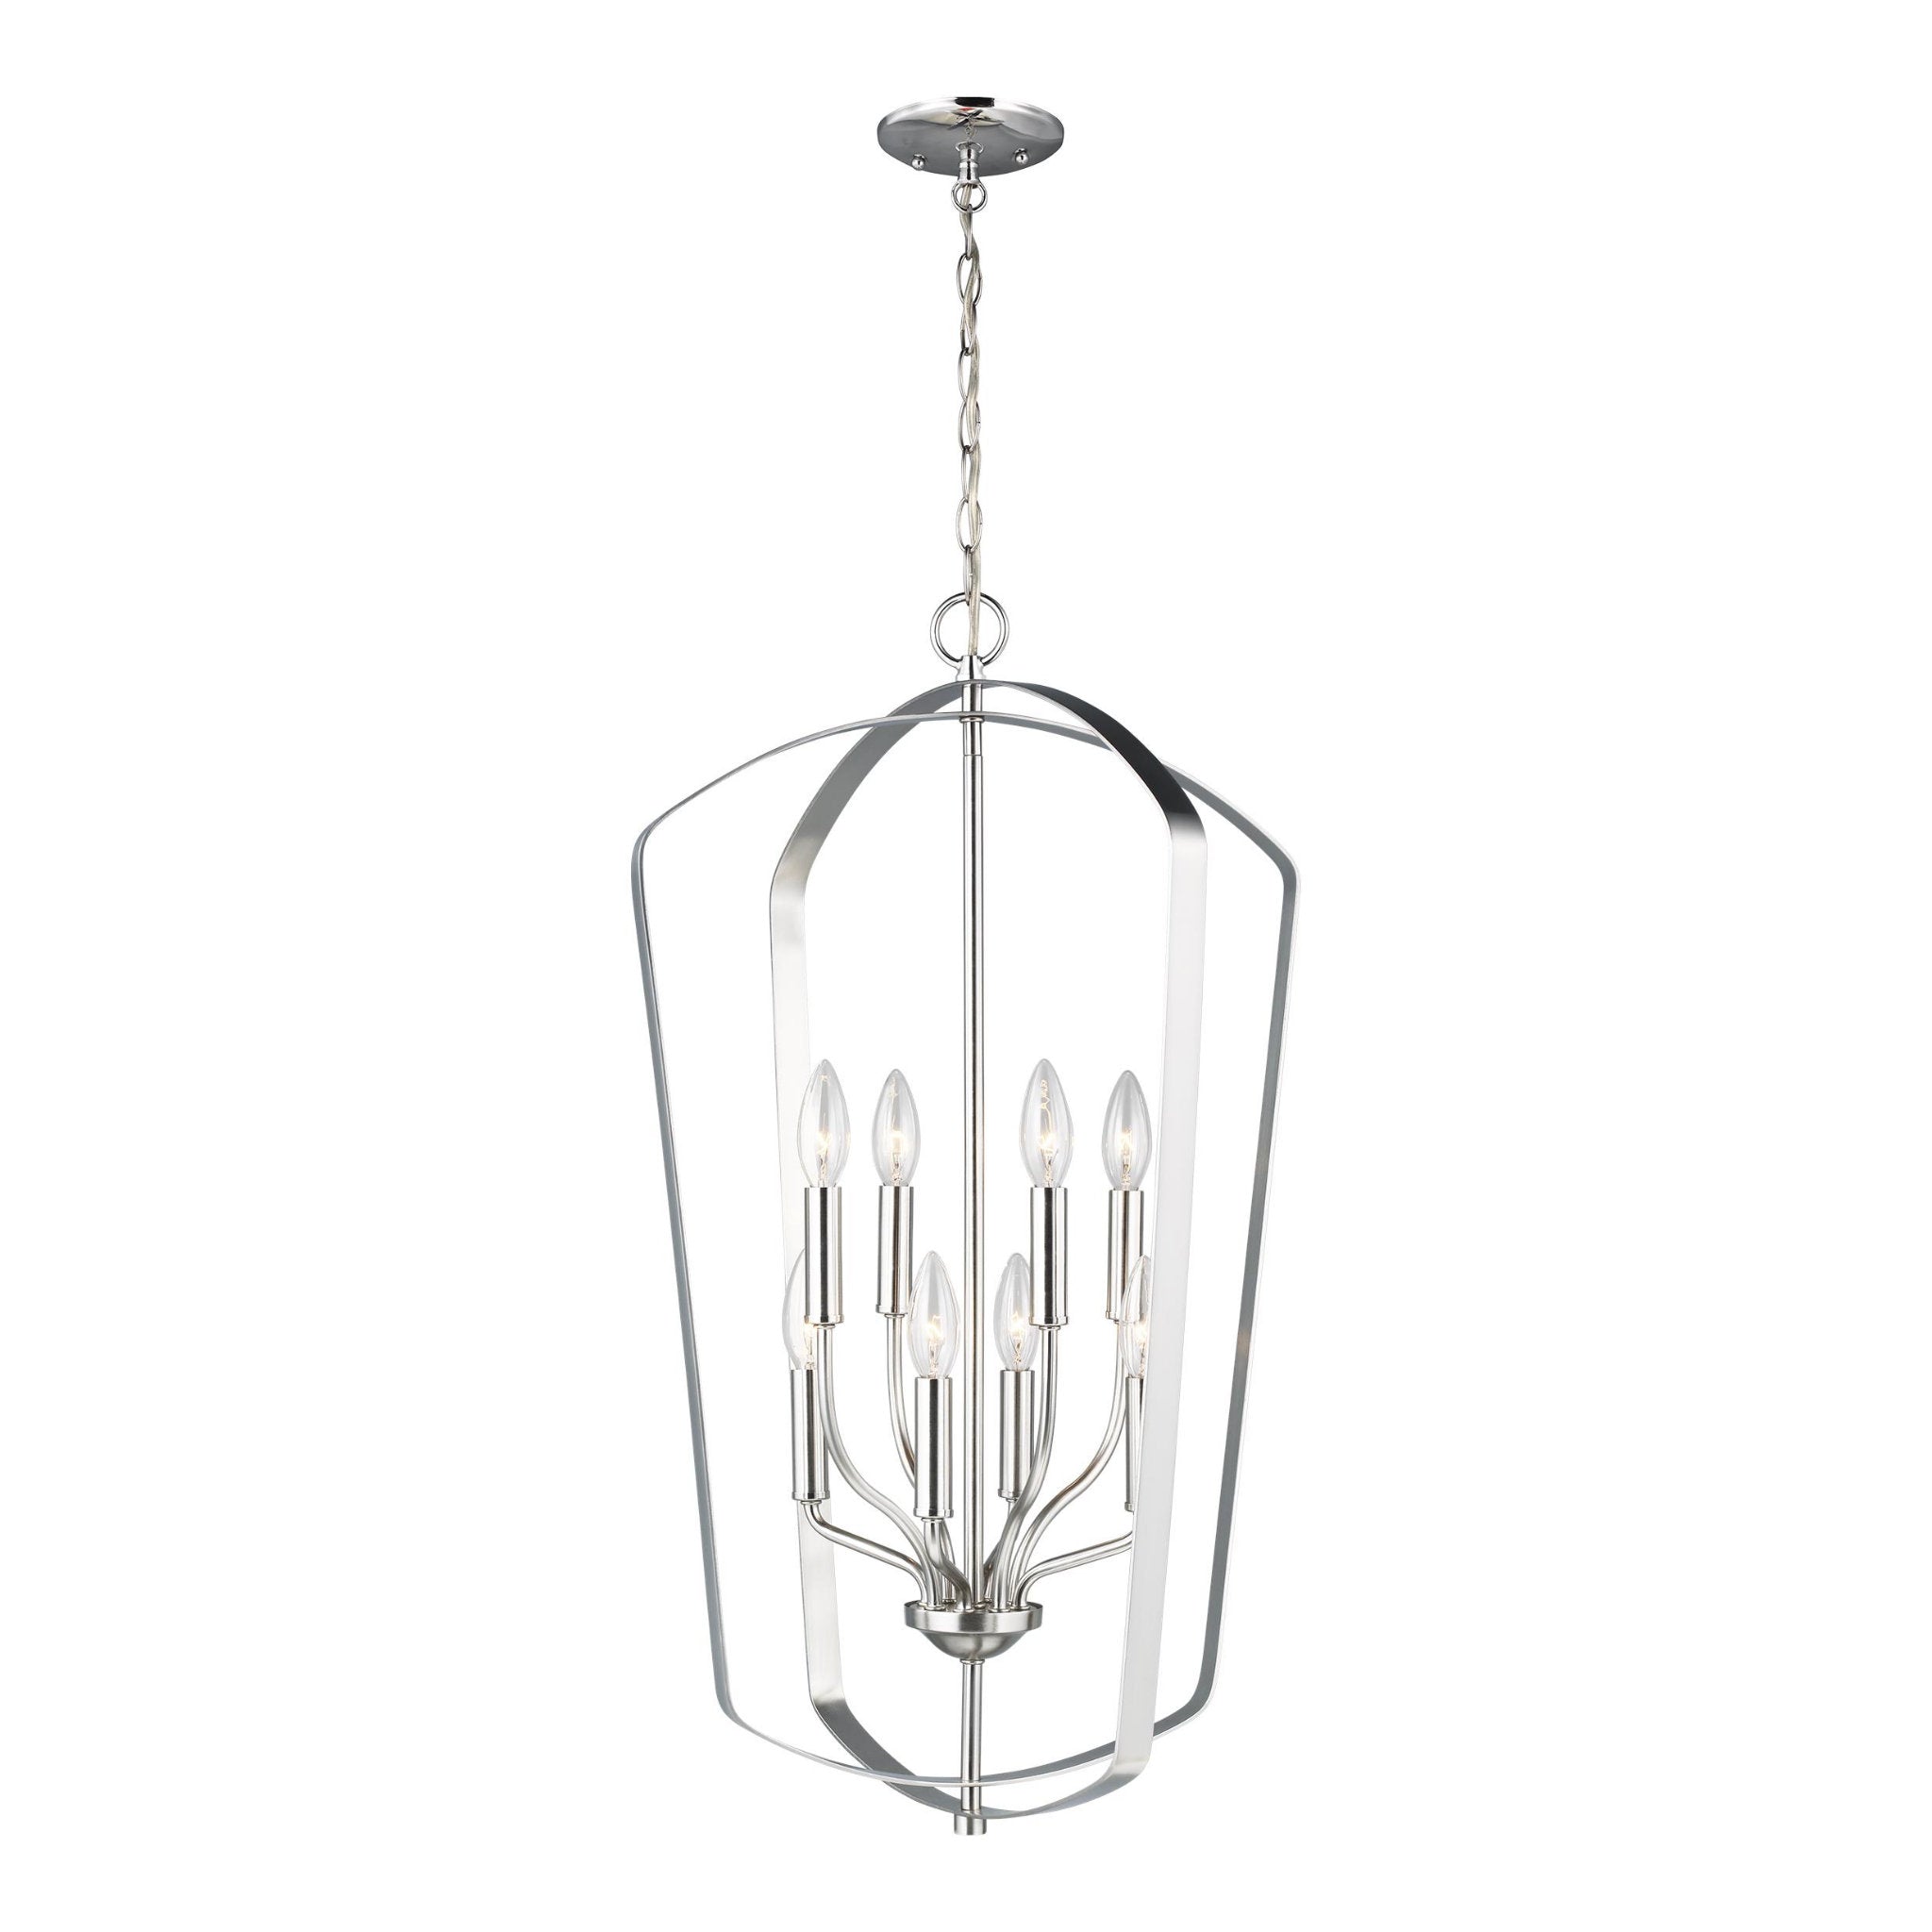 Romee Large Eight Light Hall / Foyer Transitional Pendant 30" Height Steel in Brushed Nickel